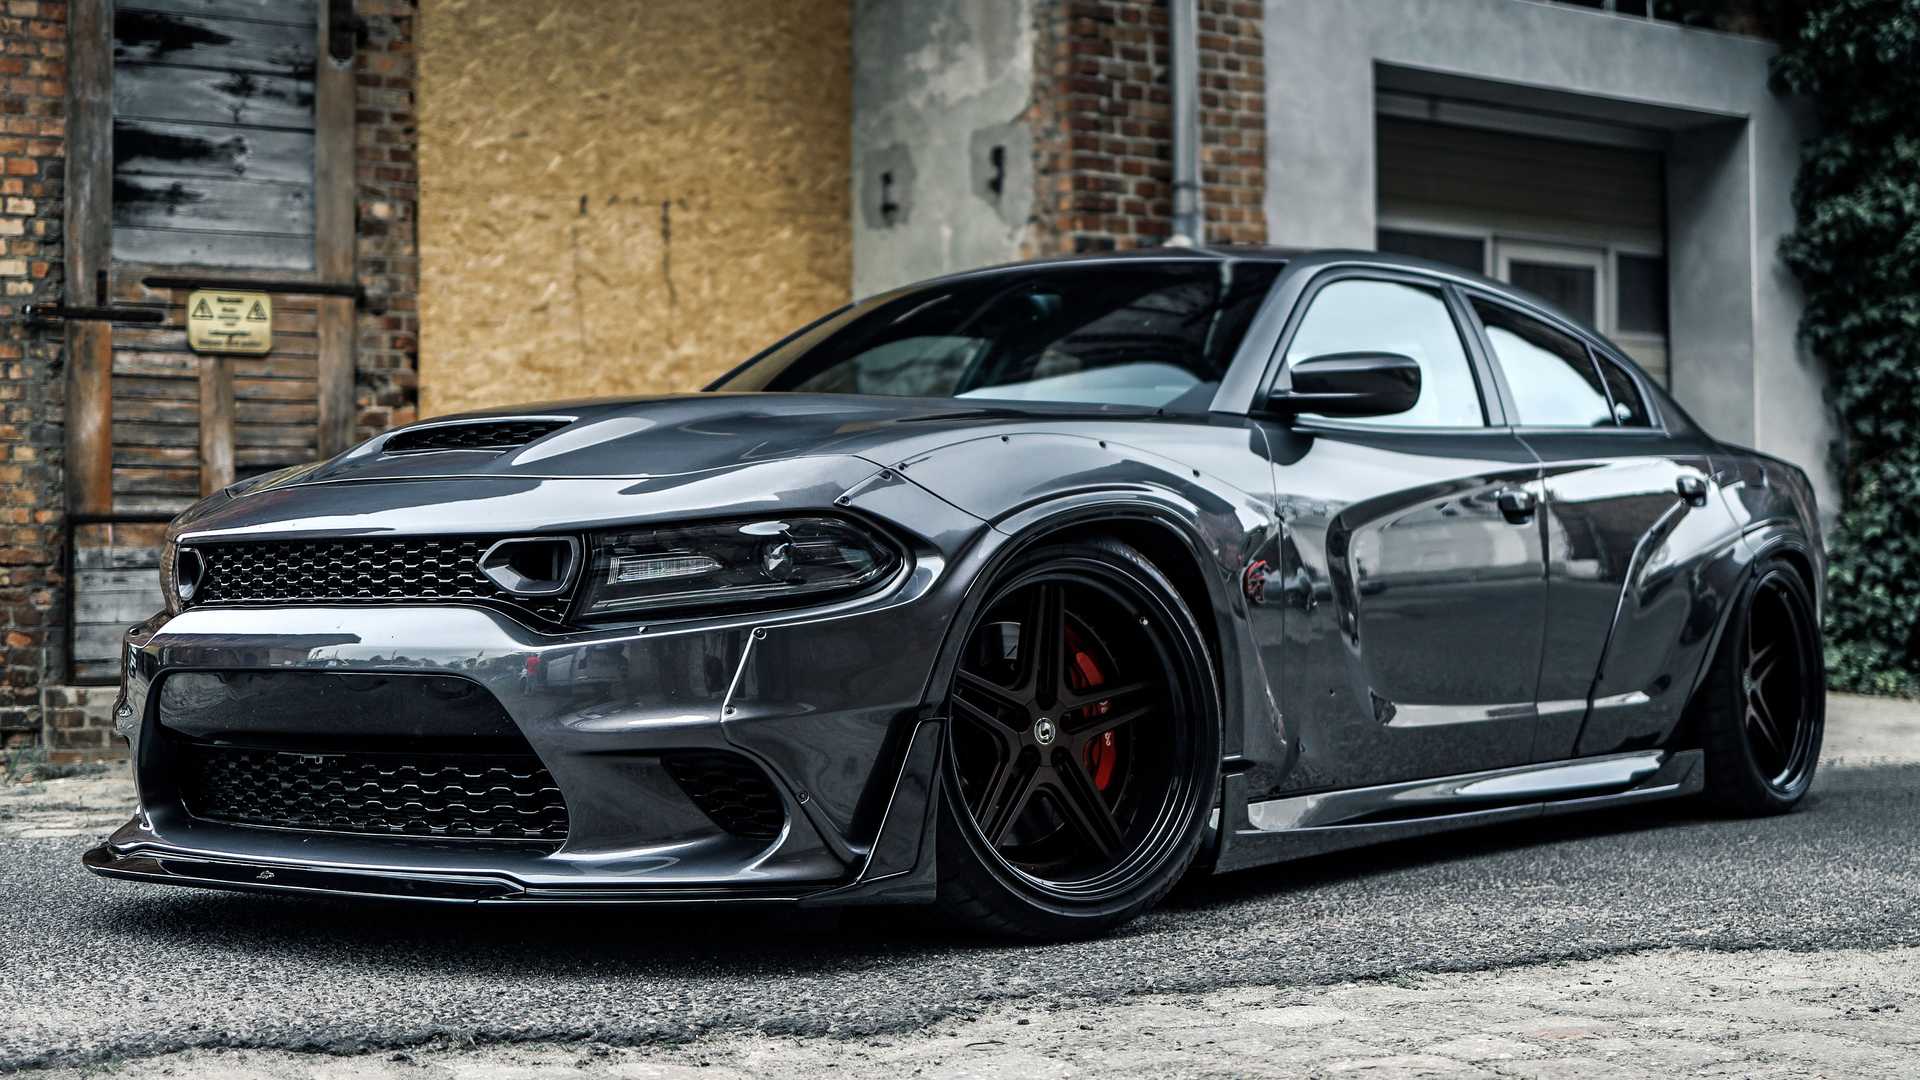 dodge-charger-srt-hellcat-widebody-by-bader (12).jpg